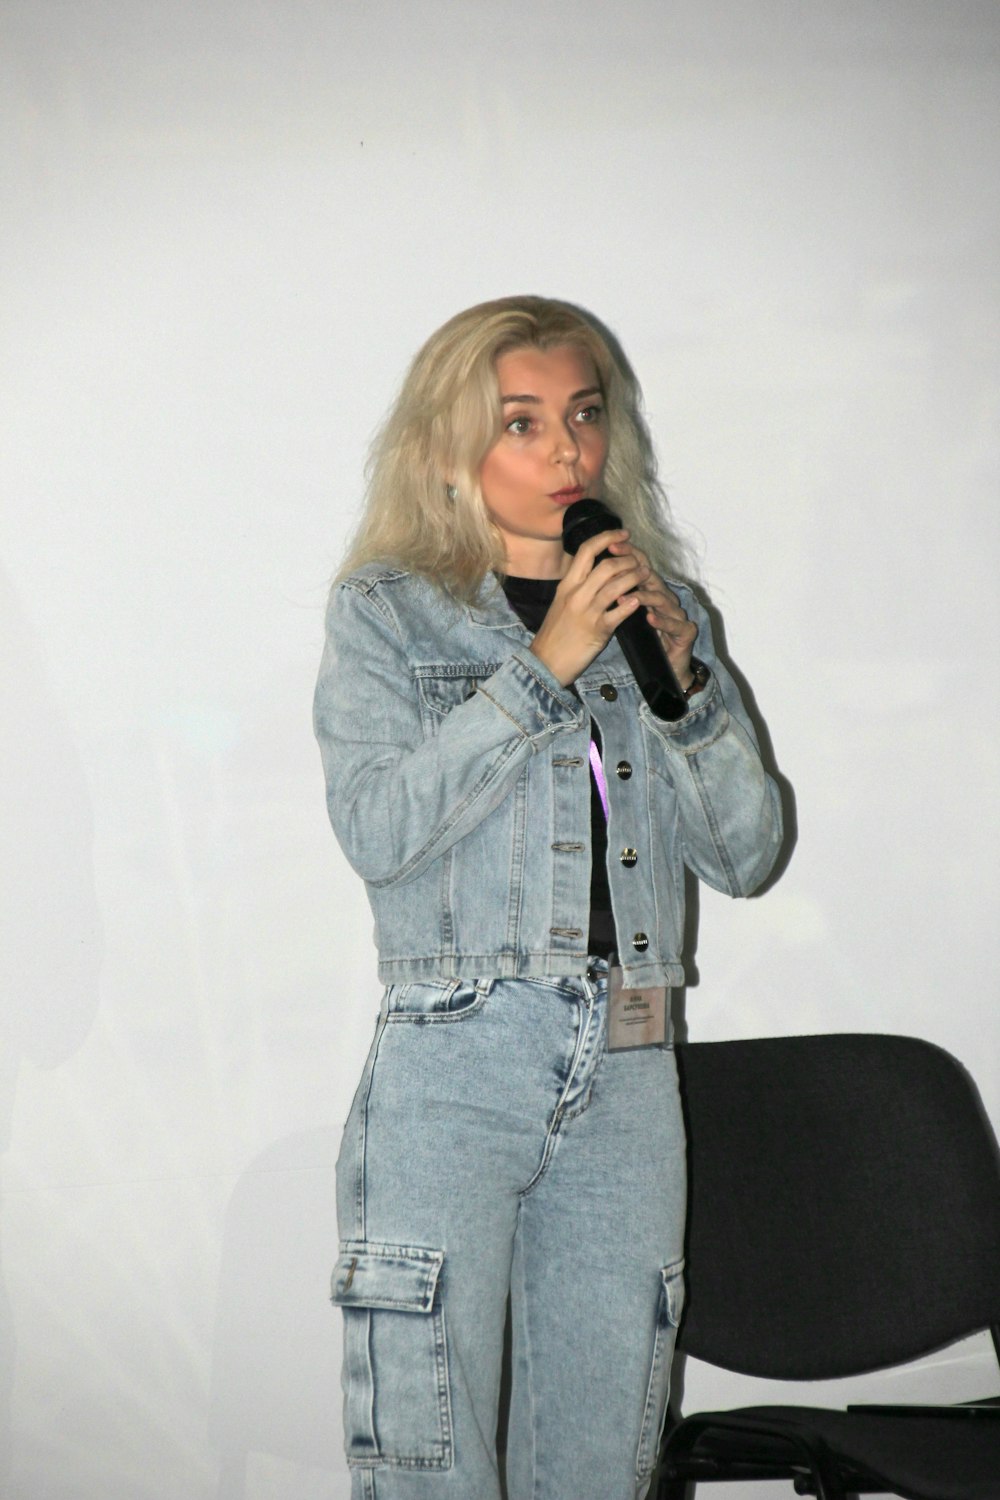 a woman standing in front of a white wall holding a microphone